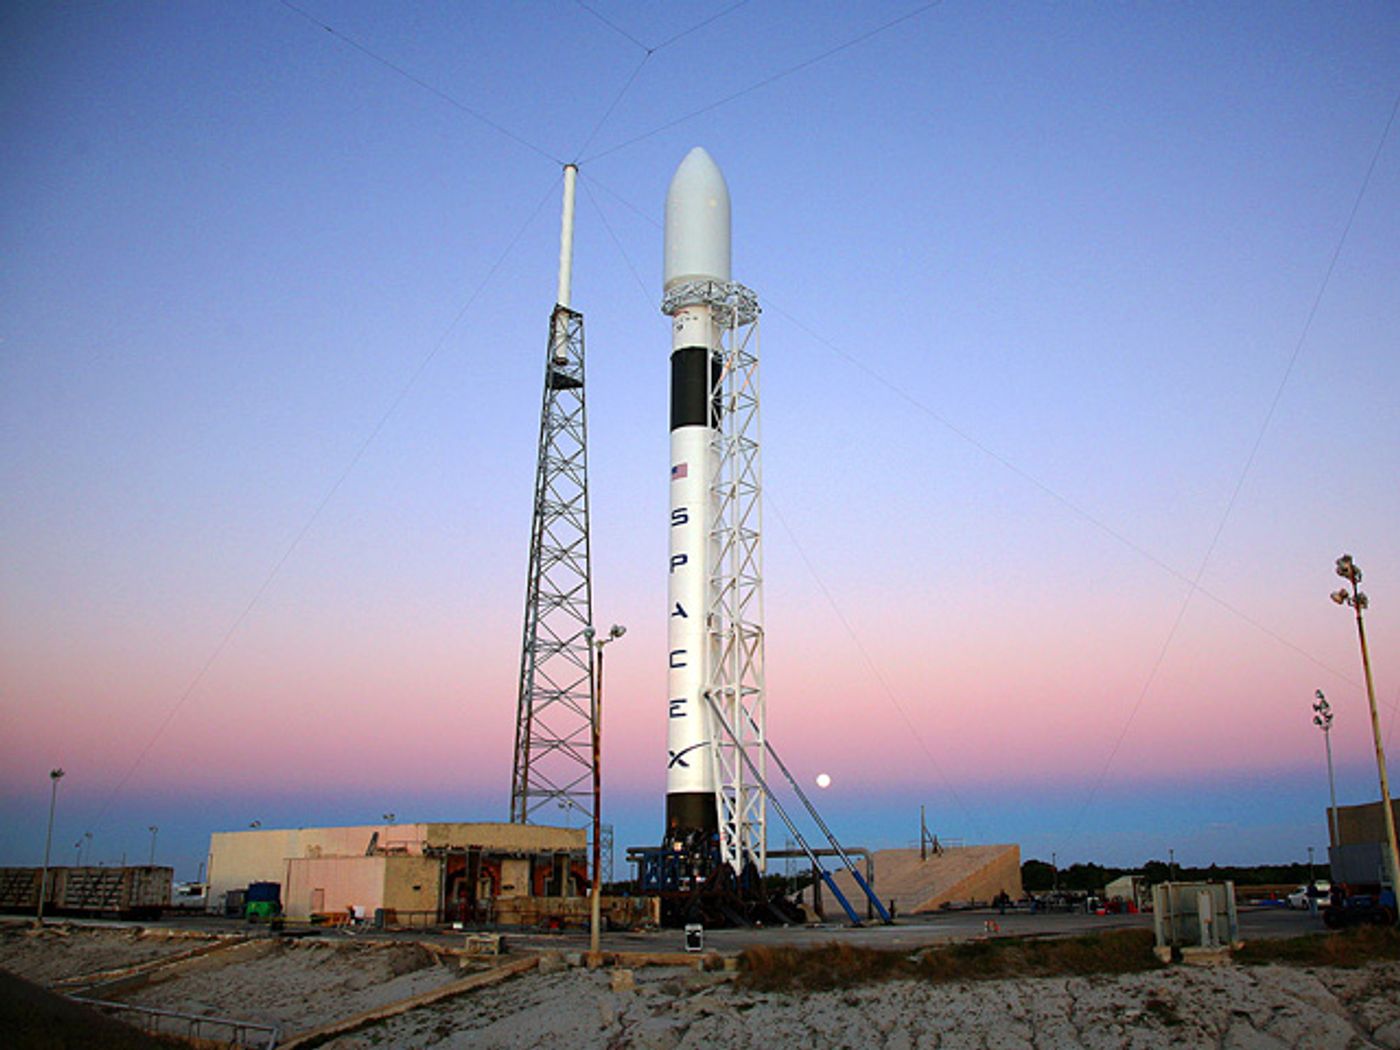 A Falcon 9 rocket stands tall at its launch site.